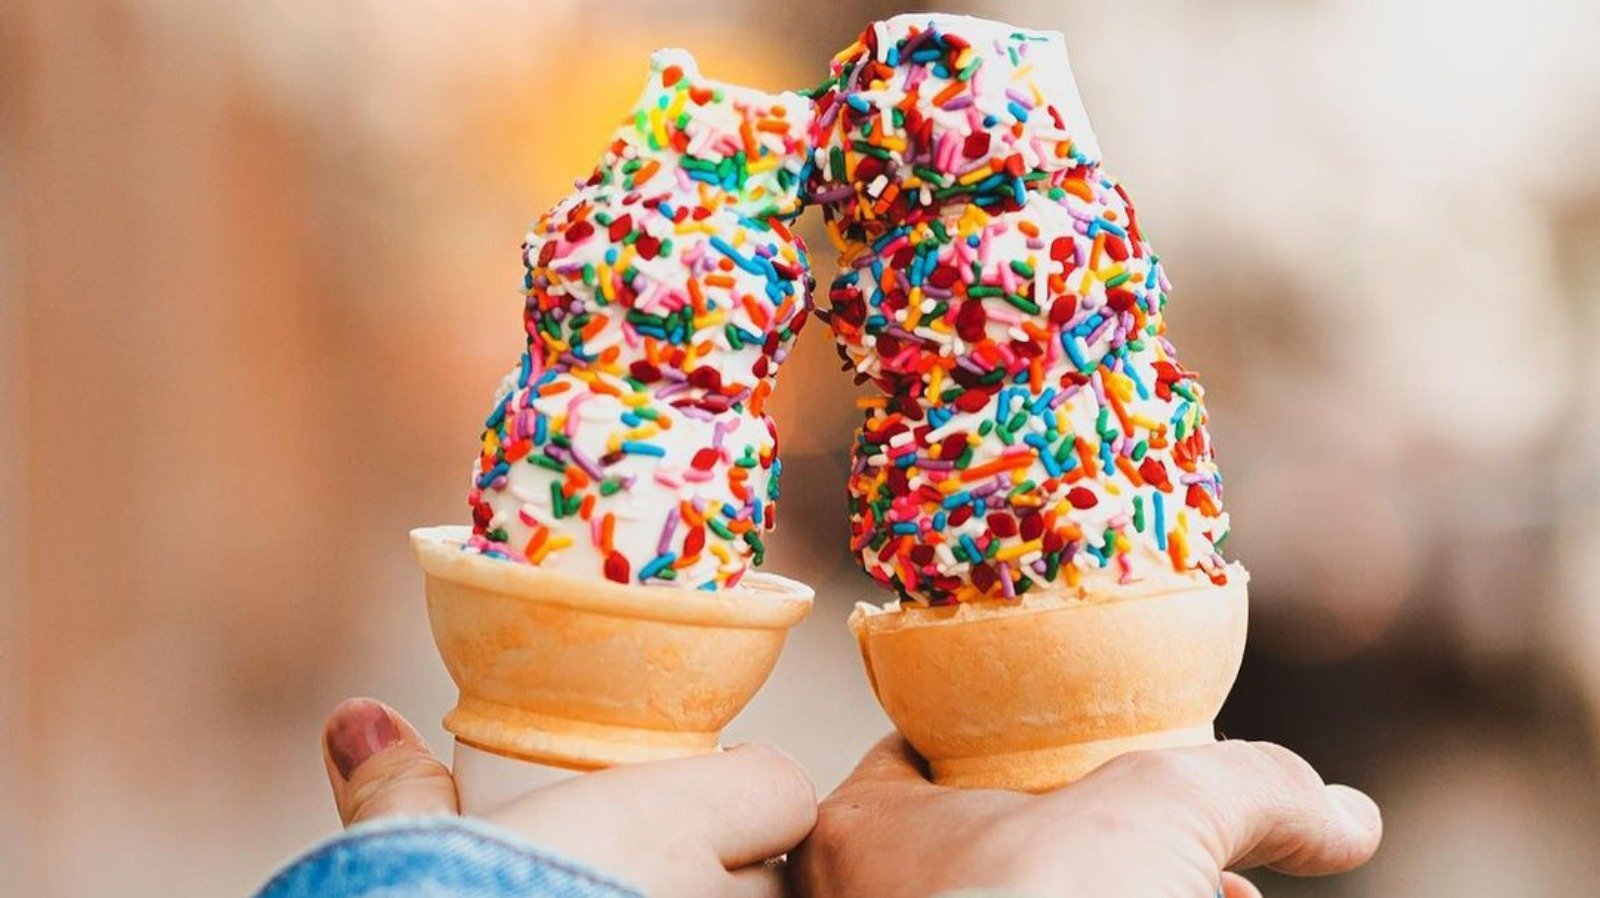 the-dairy-queen-hack-to-score-double-the-toppings-on-dipped-cones